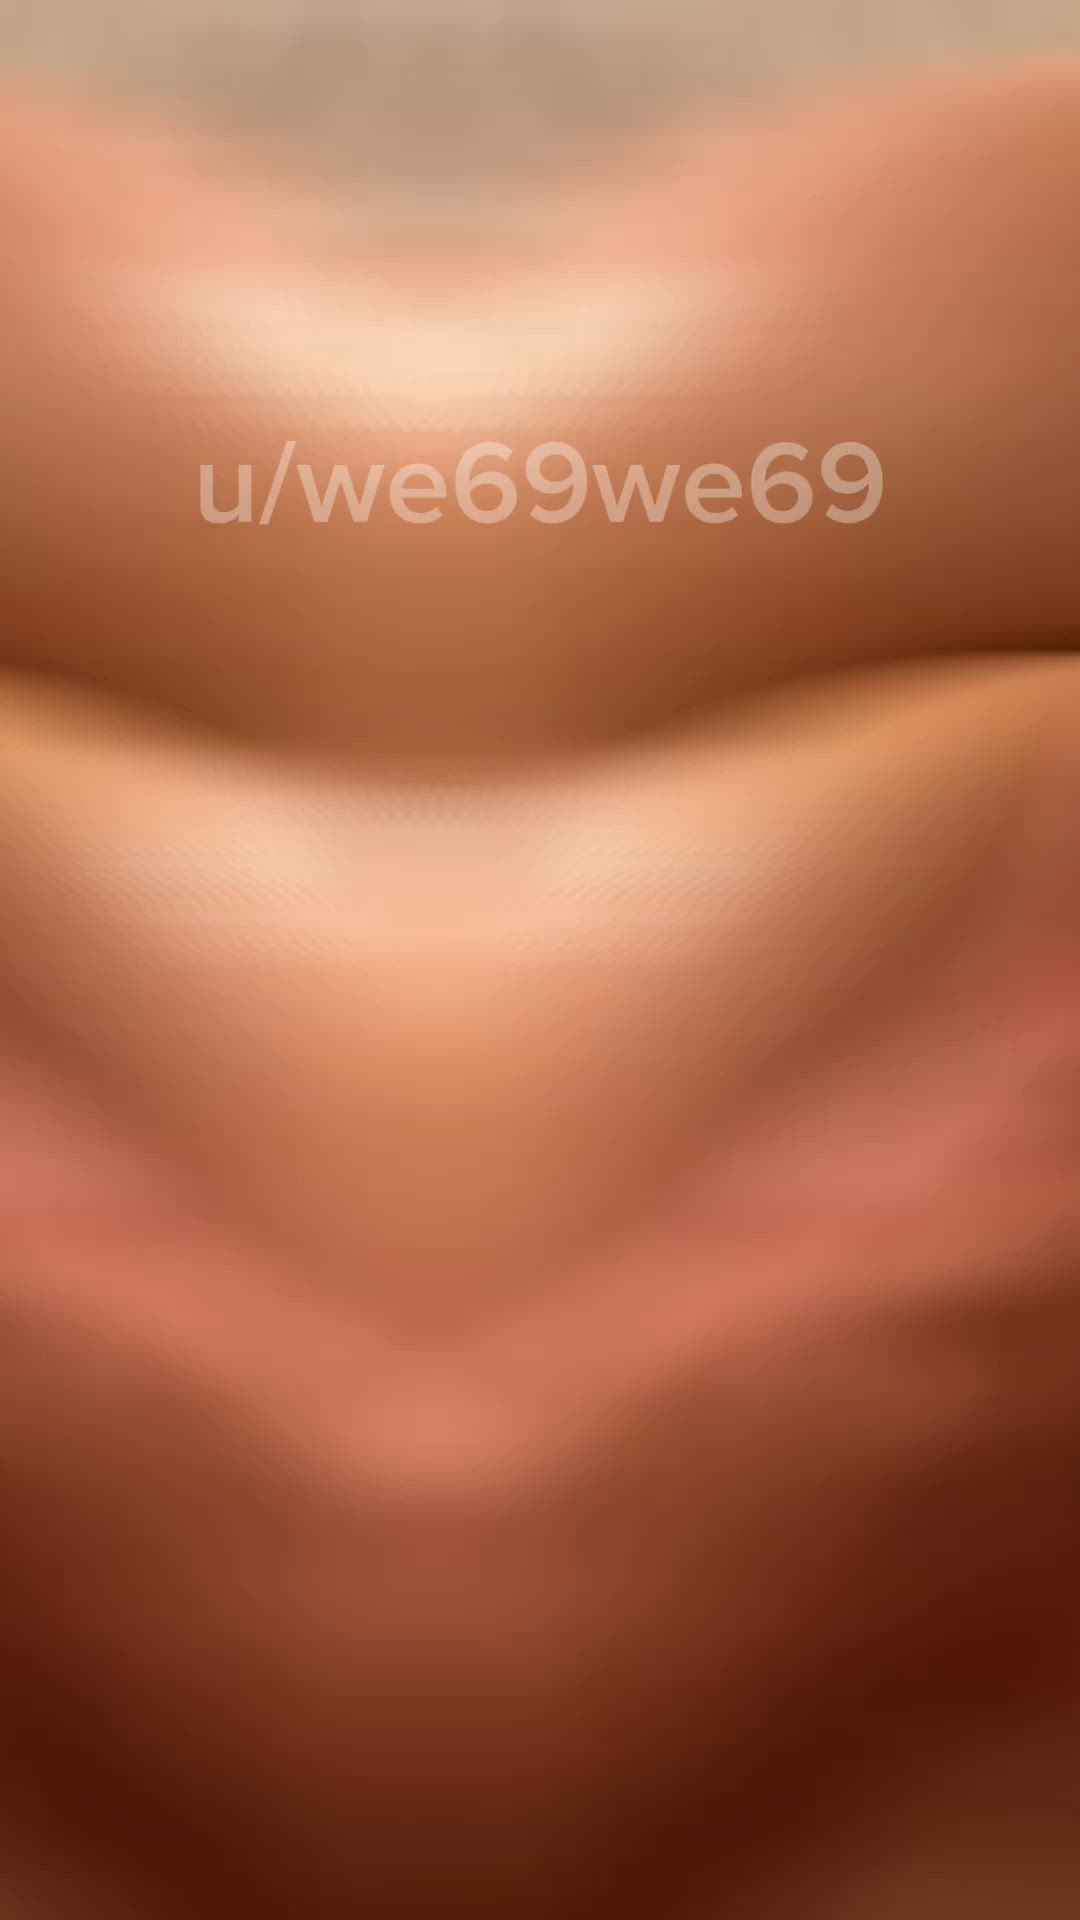 Ass porn video with onlyfans model we69we69 <strong>@we69we69</strong>